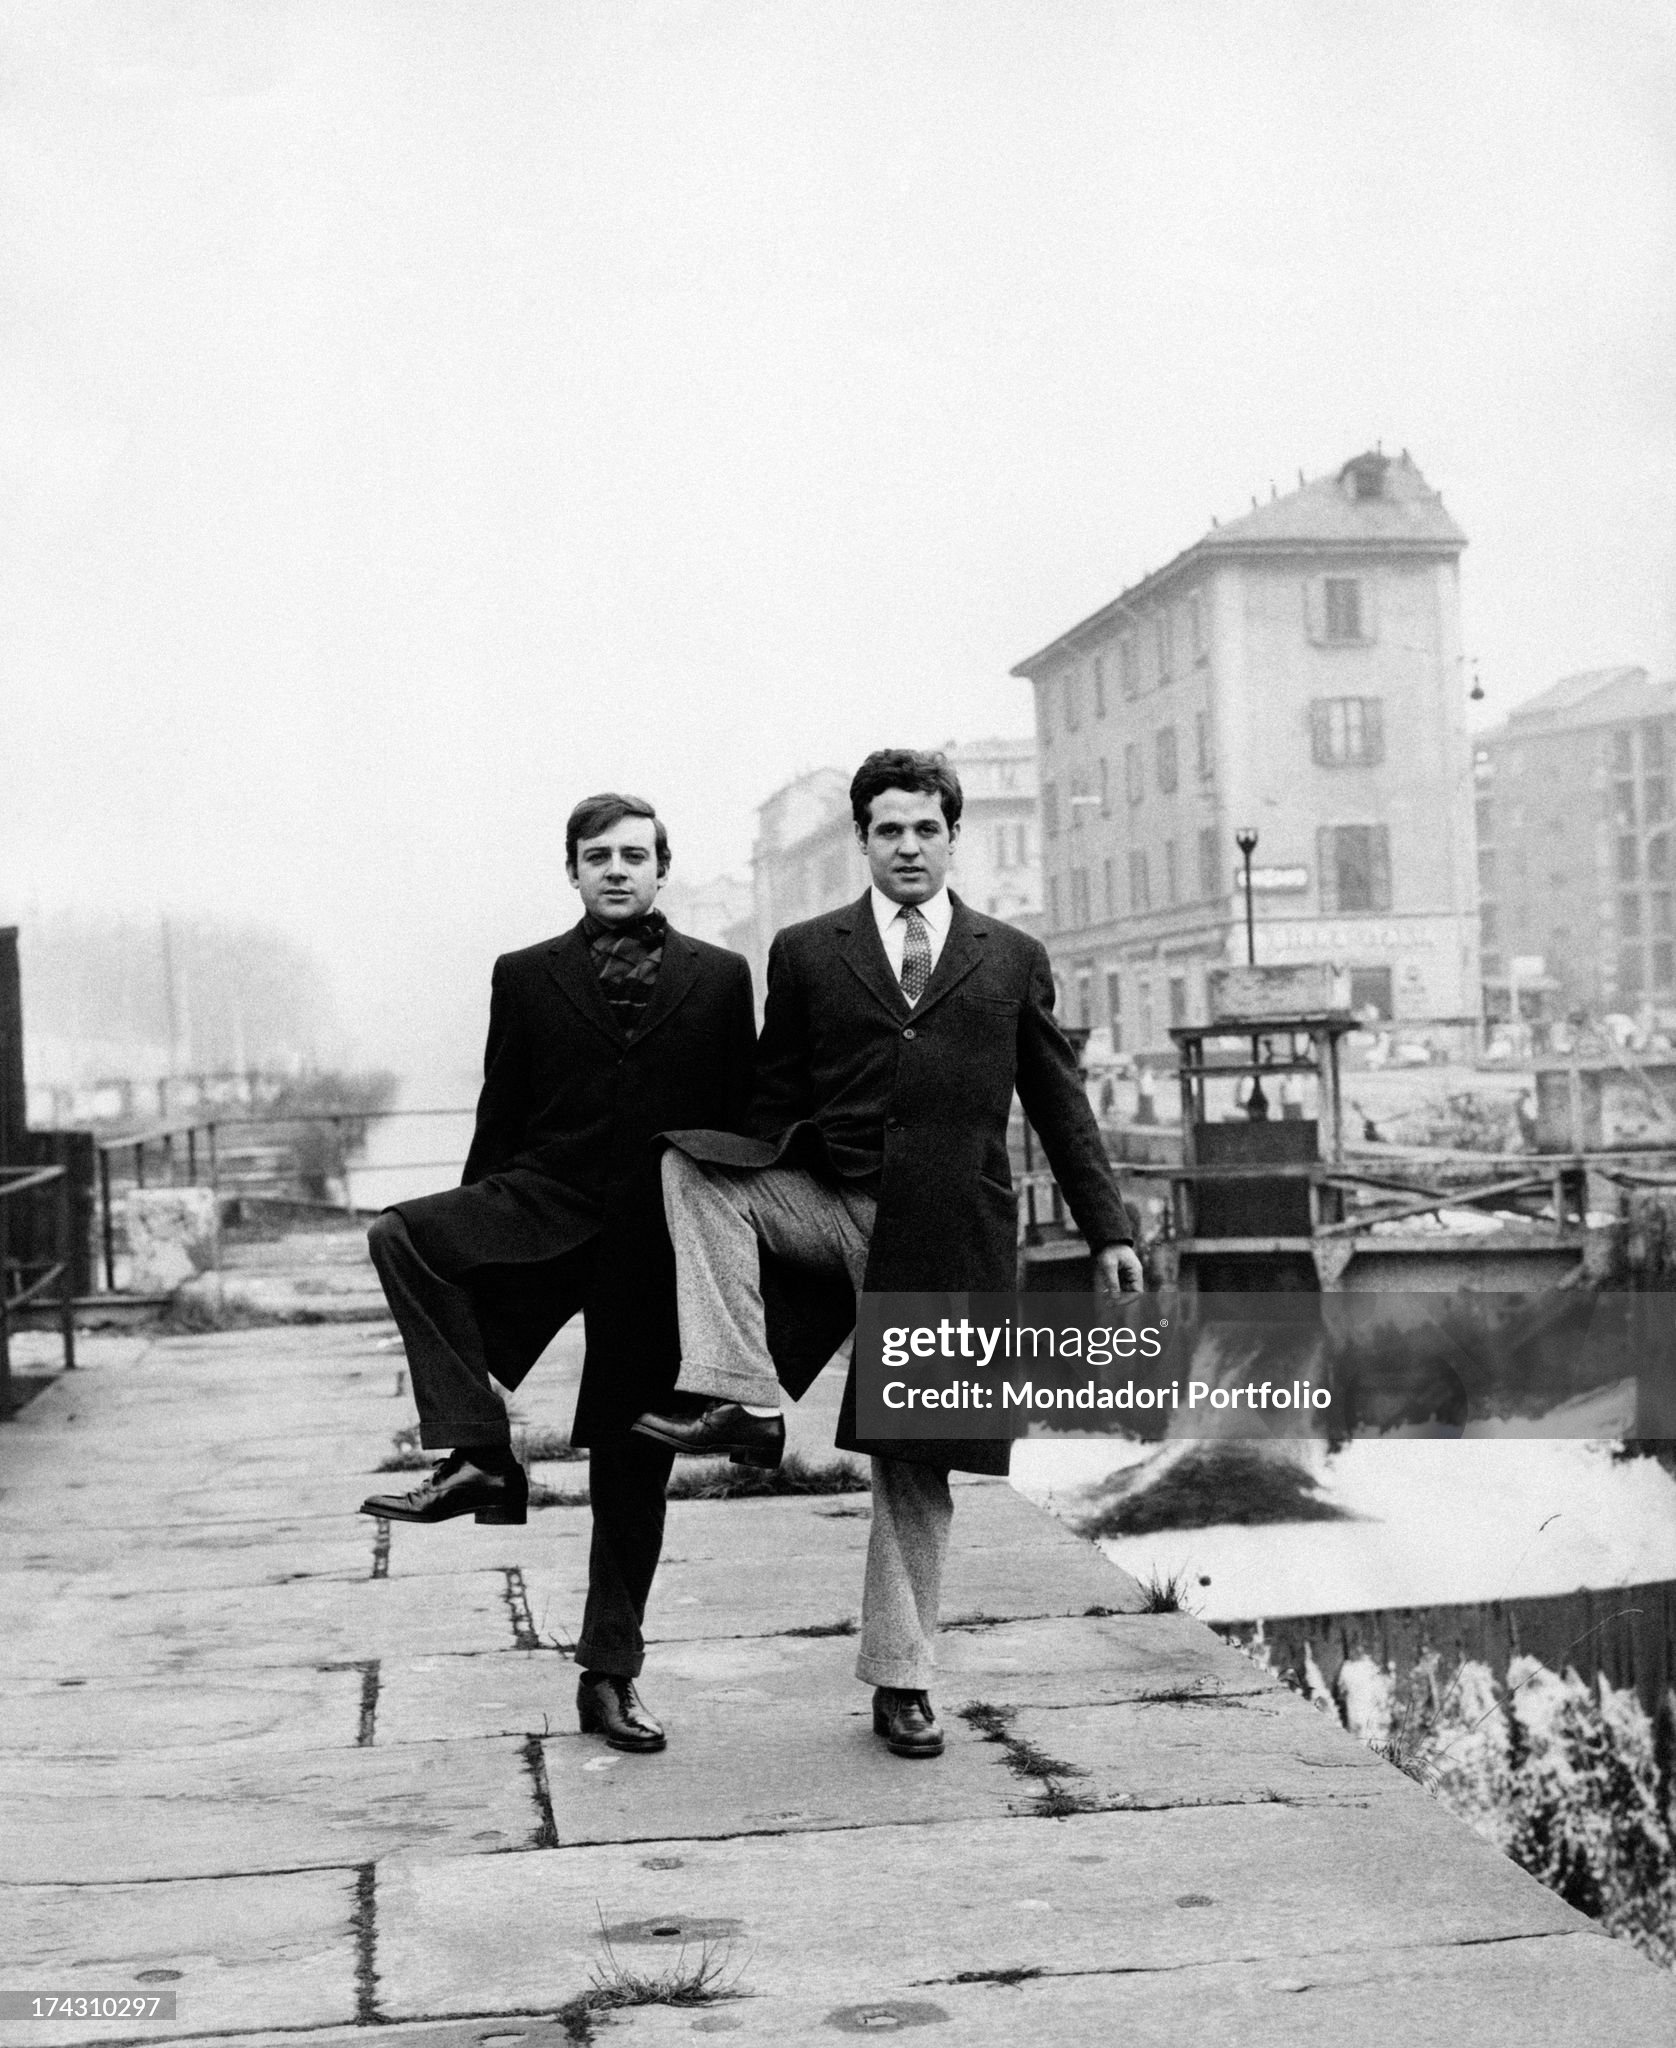 Cochi Ponzoni and Renato Pozzetto doing a step from one of their sketches in a street along the Naviglio in Milan in February 1968. 